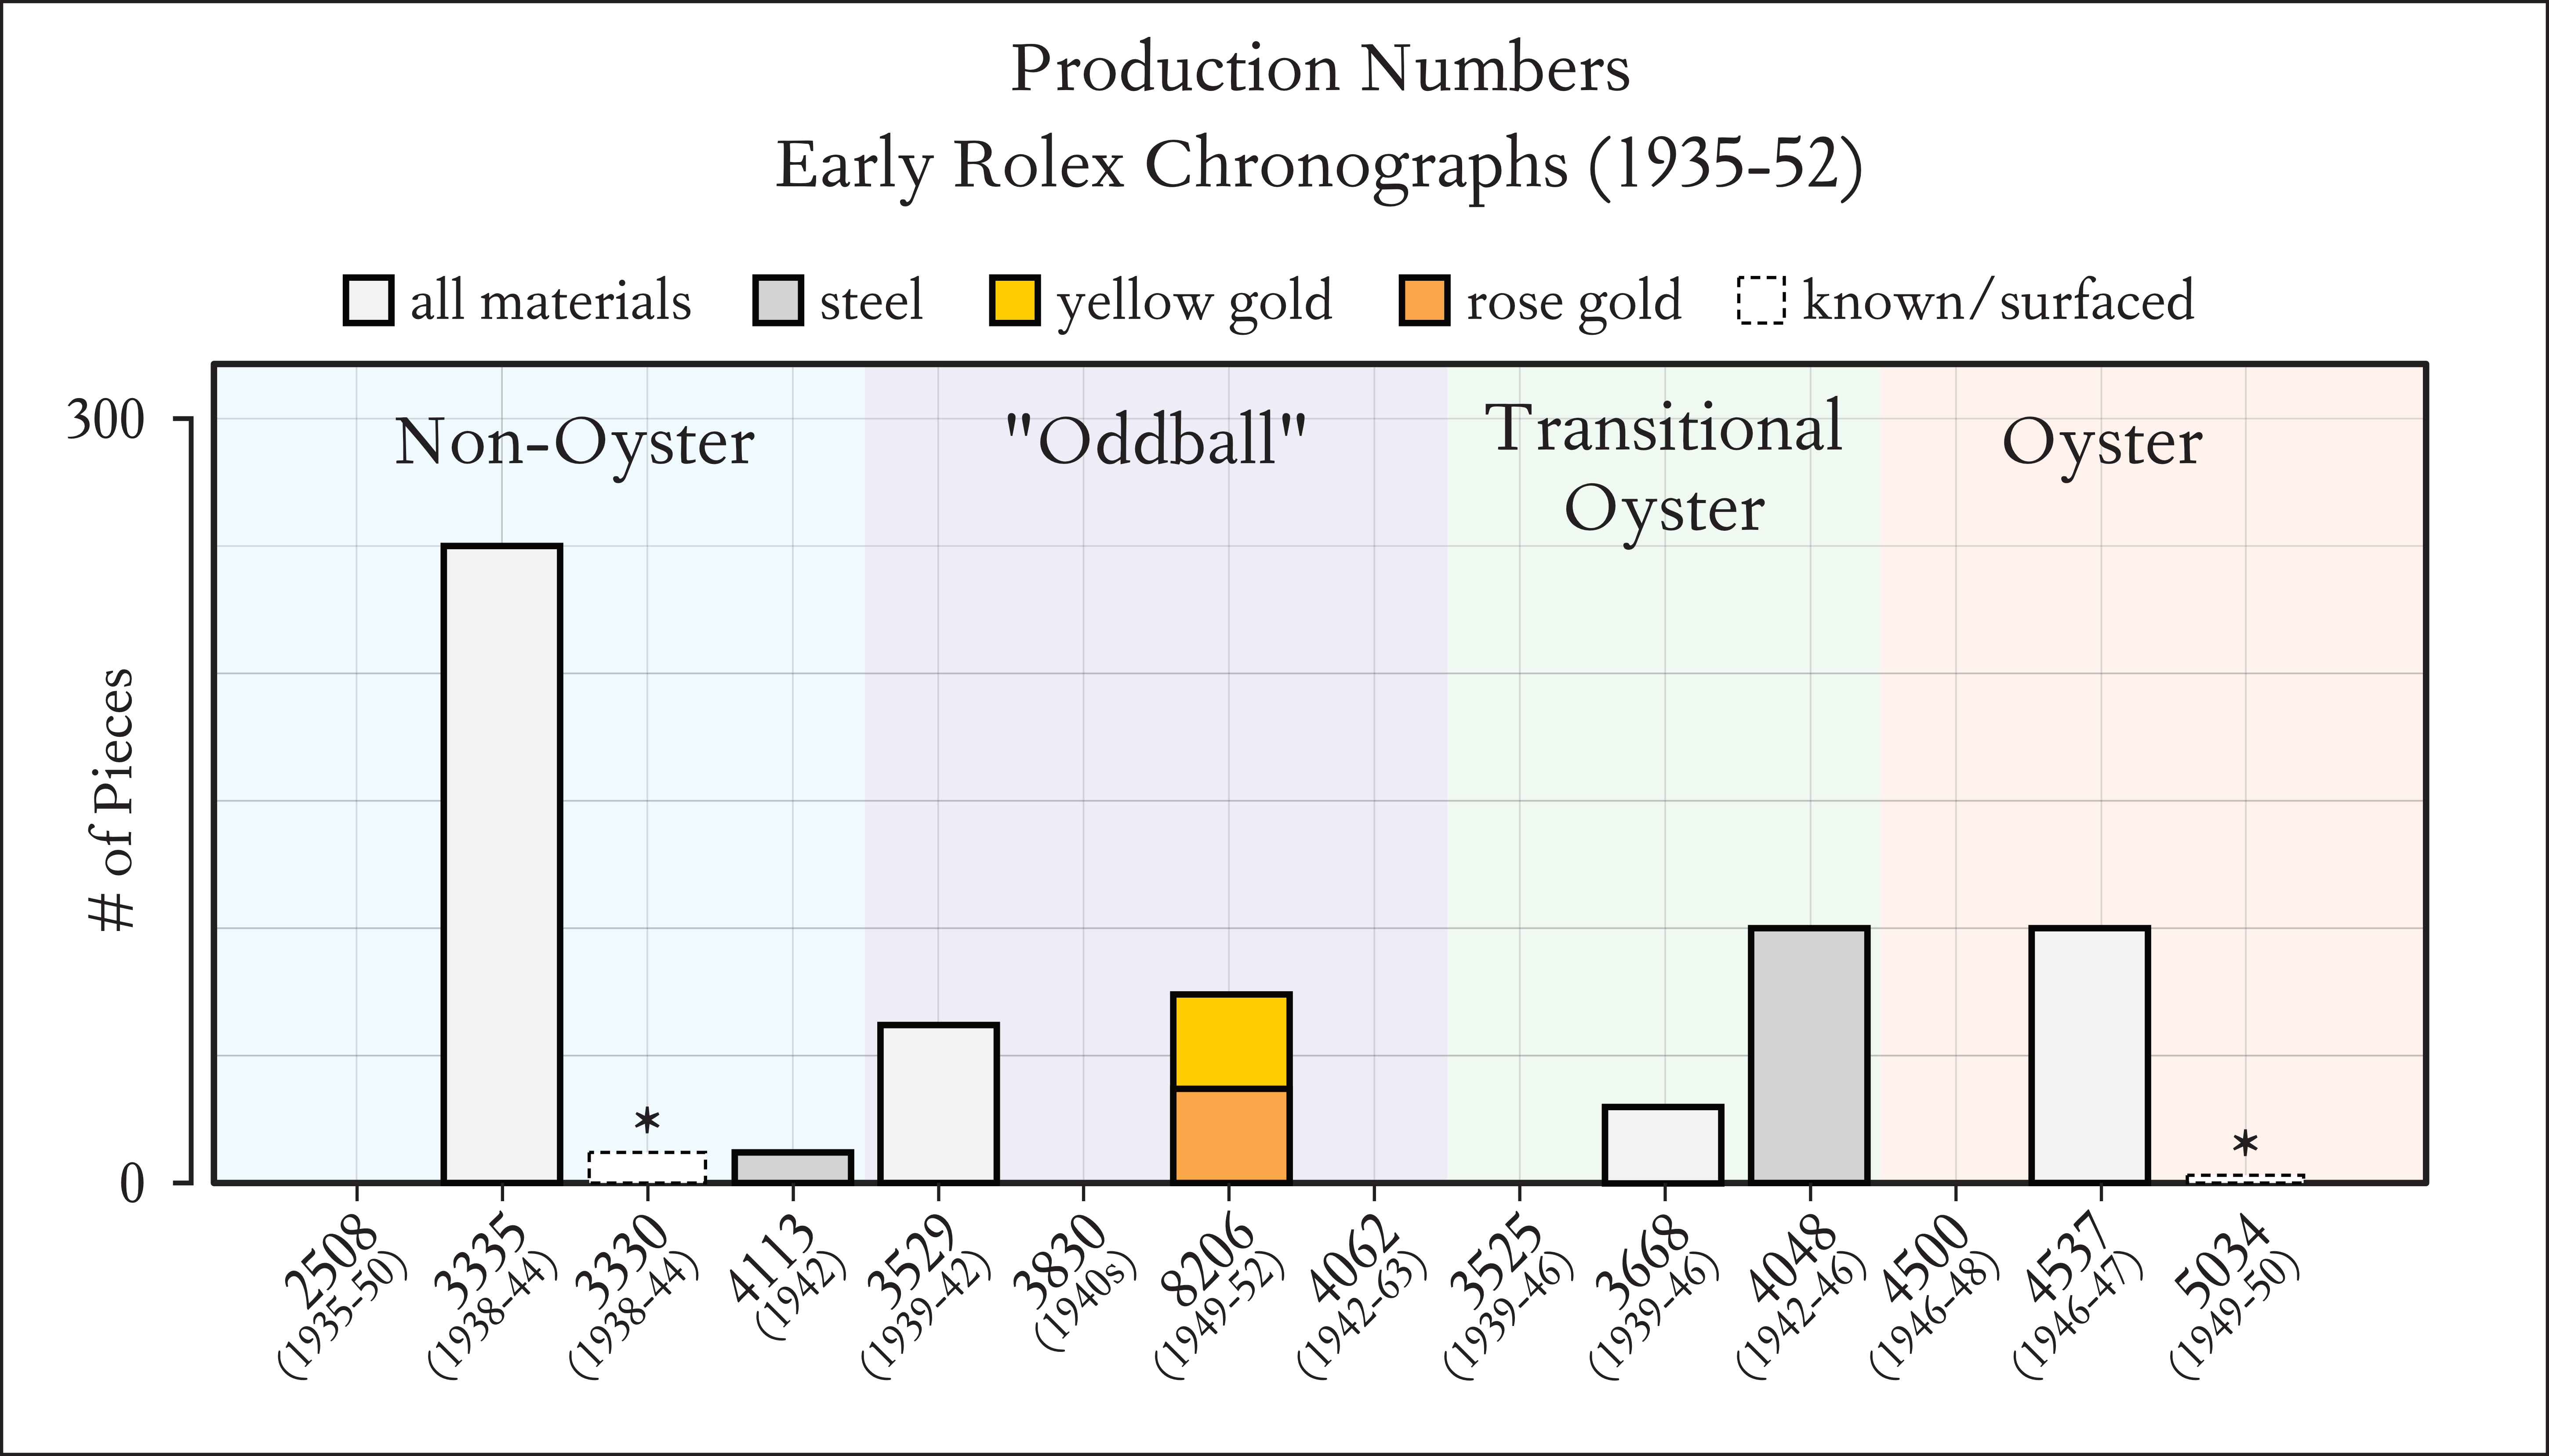 Production Numbers for Rolex Chronograph Watches between 1939-1950